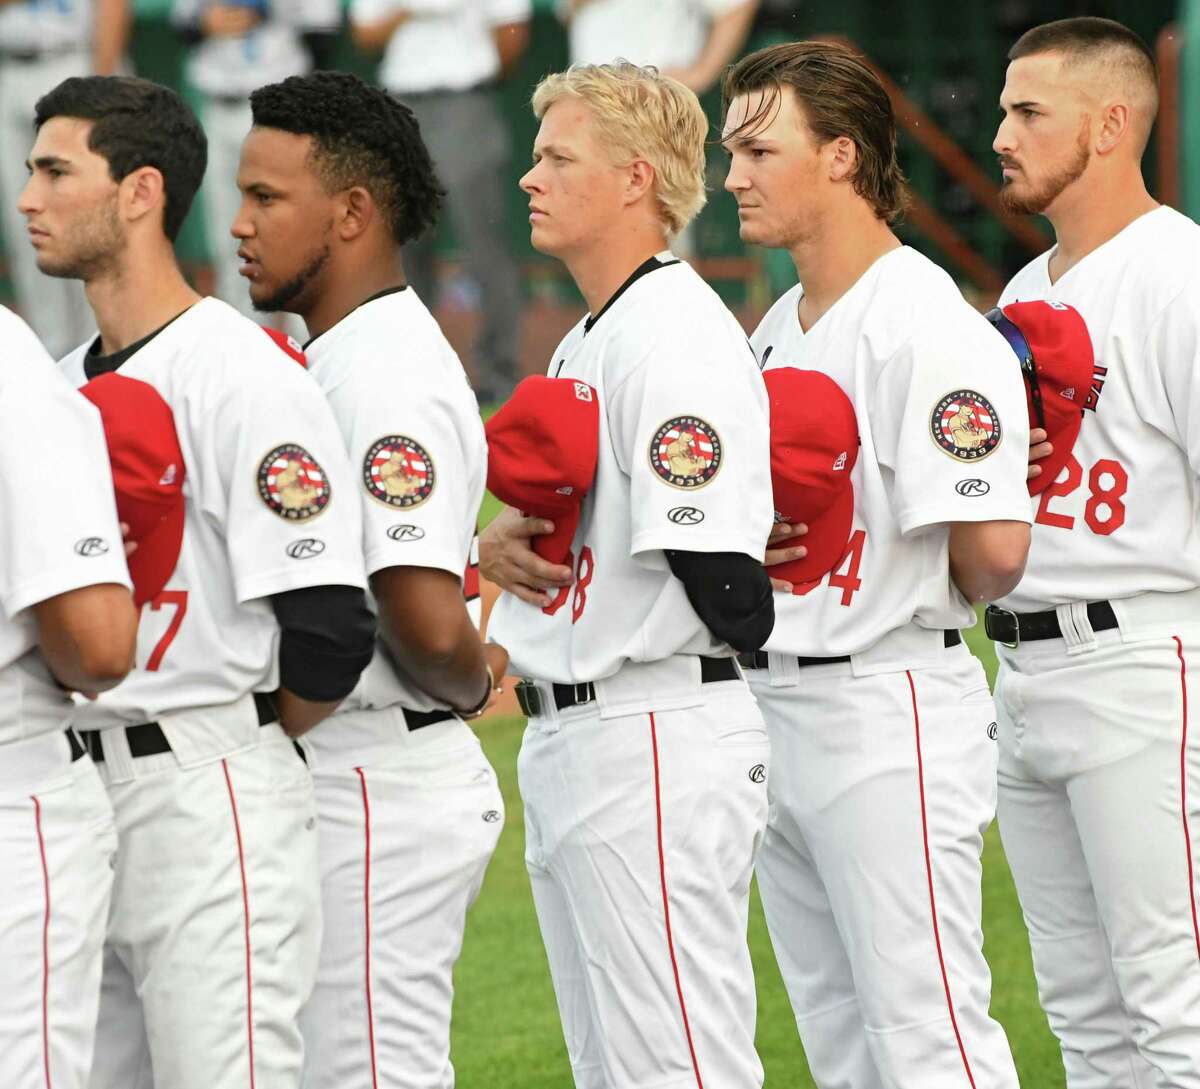 Tri-City ValleyCats pitcher Austin Hansen, center, listens to the National Anthem during a baseball game against the Hudson Valley Renegades at Joe Bruno Stadium on Wednesday, Aug. 8, 2018 in Troy, N.Y. (Lori Van Buren/Times Union)